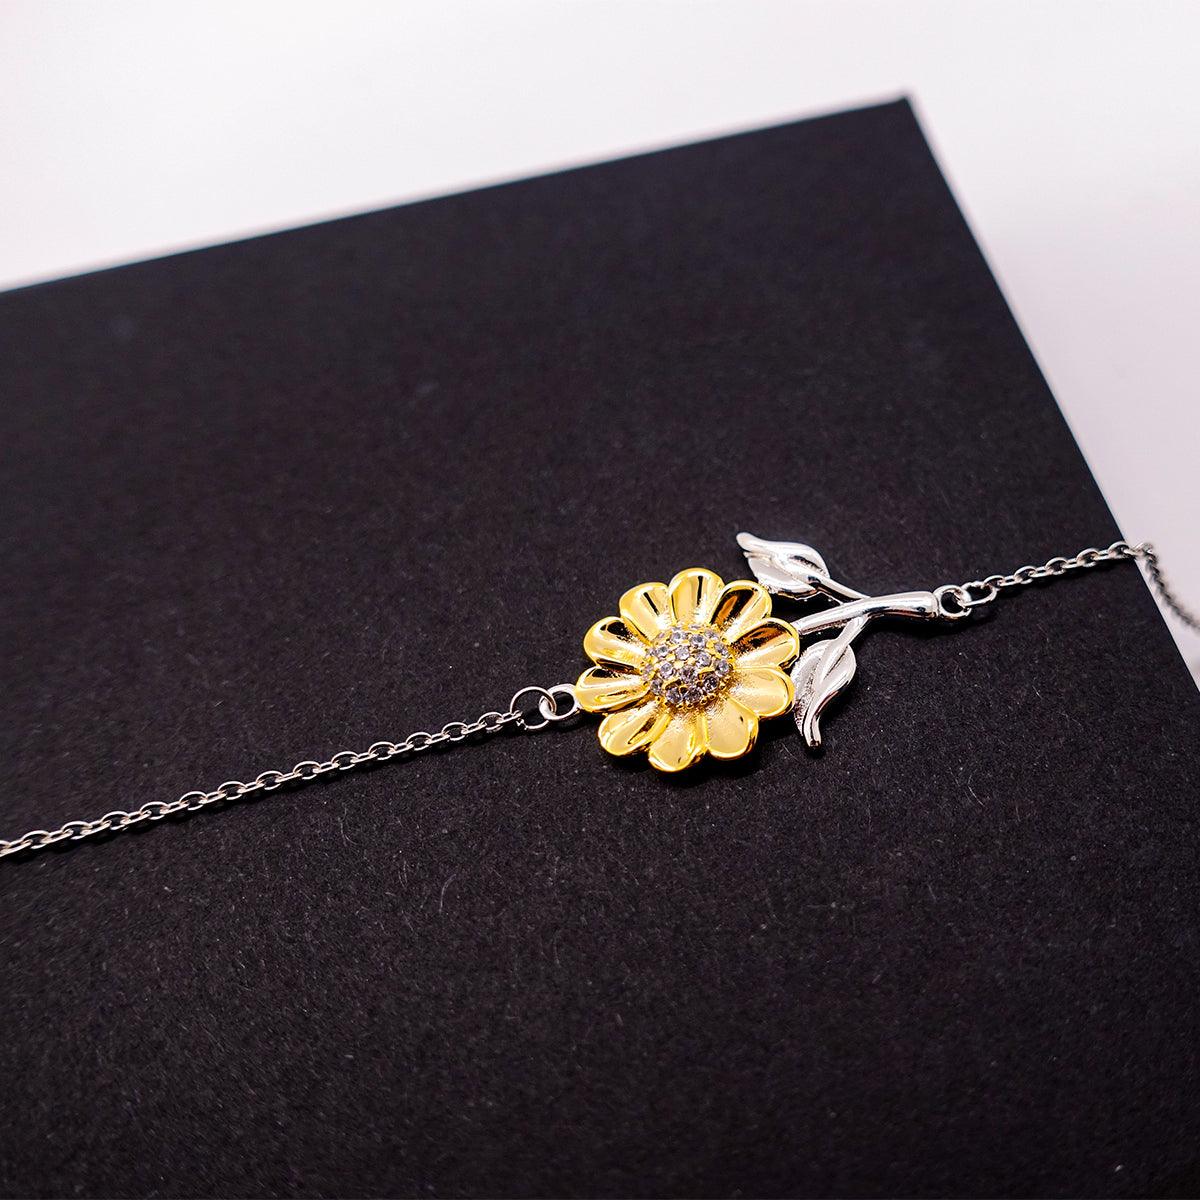 Remarkable Auctioneer Gifts, Your dedication and hard work, Inspirational Birthday Christmas Unique Sunflower Bracelet For Auctioneer, Coworkers, Men, Women, Friends - Mallard Moon Gift Shop